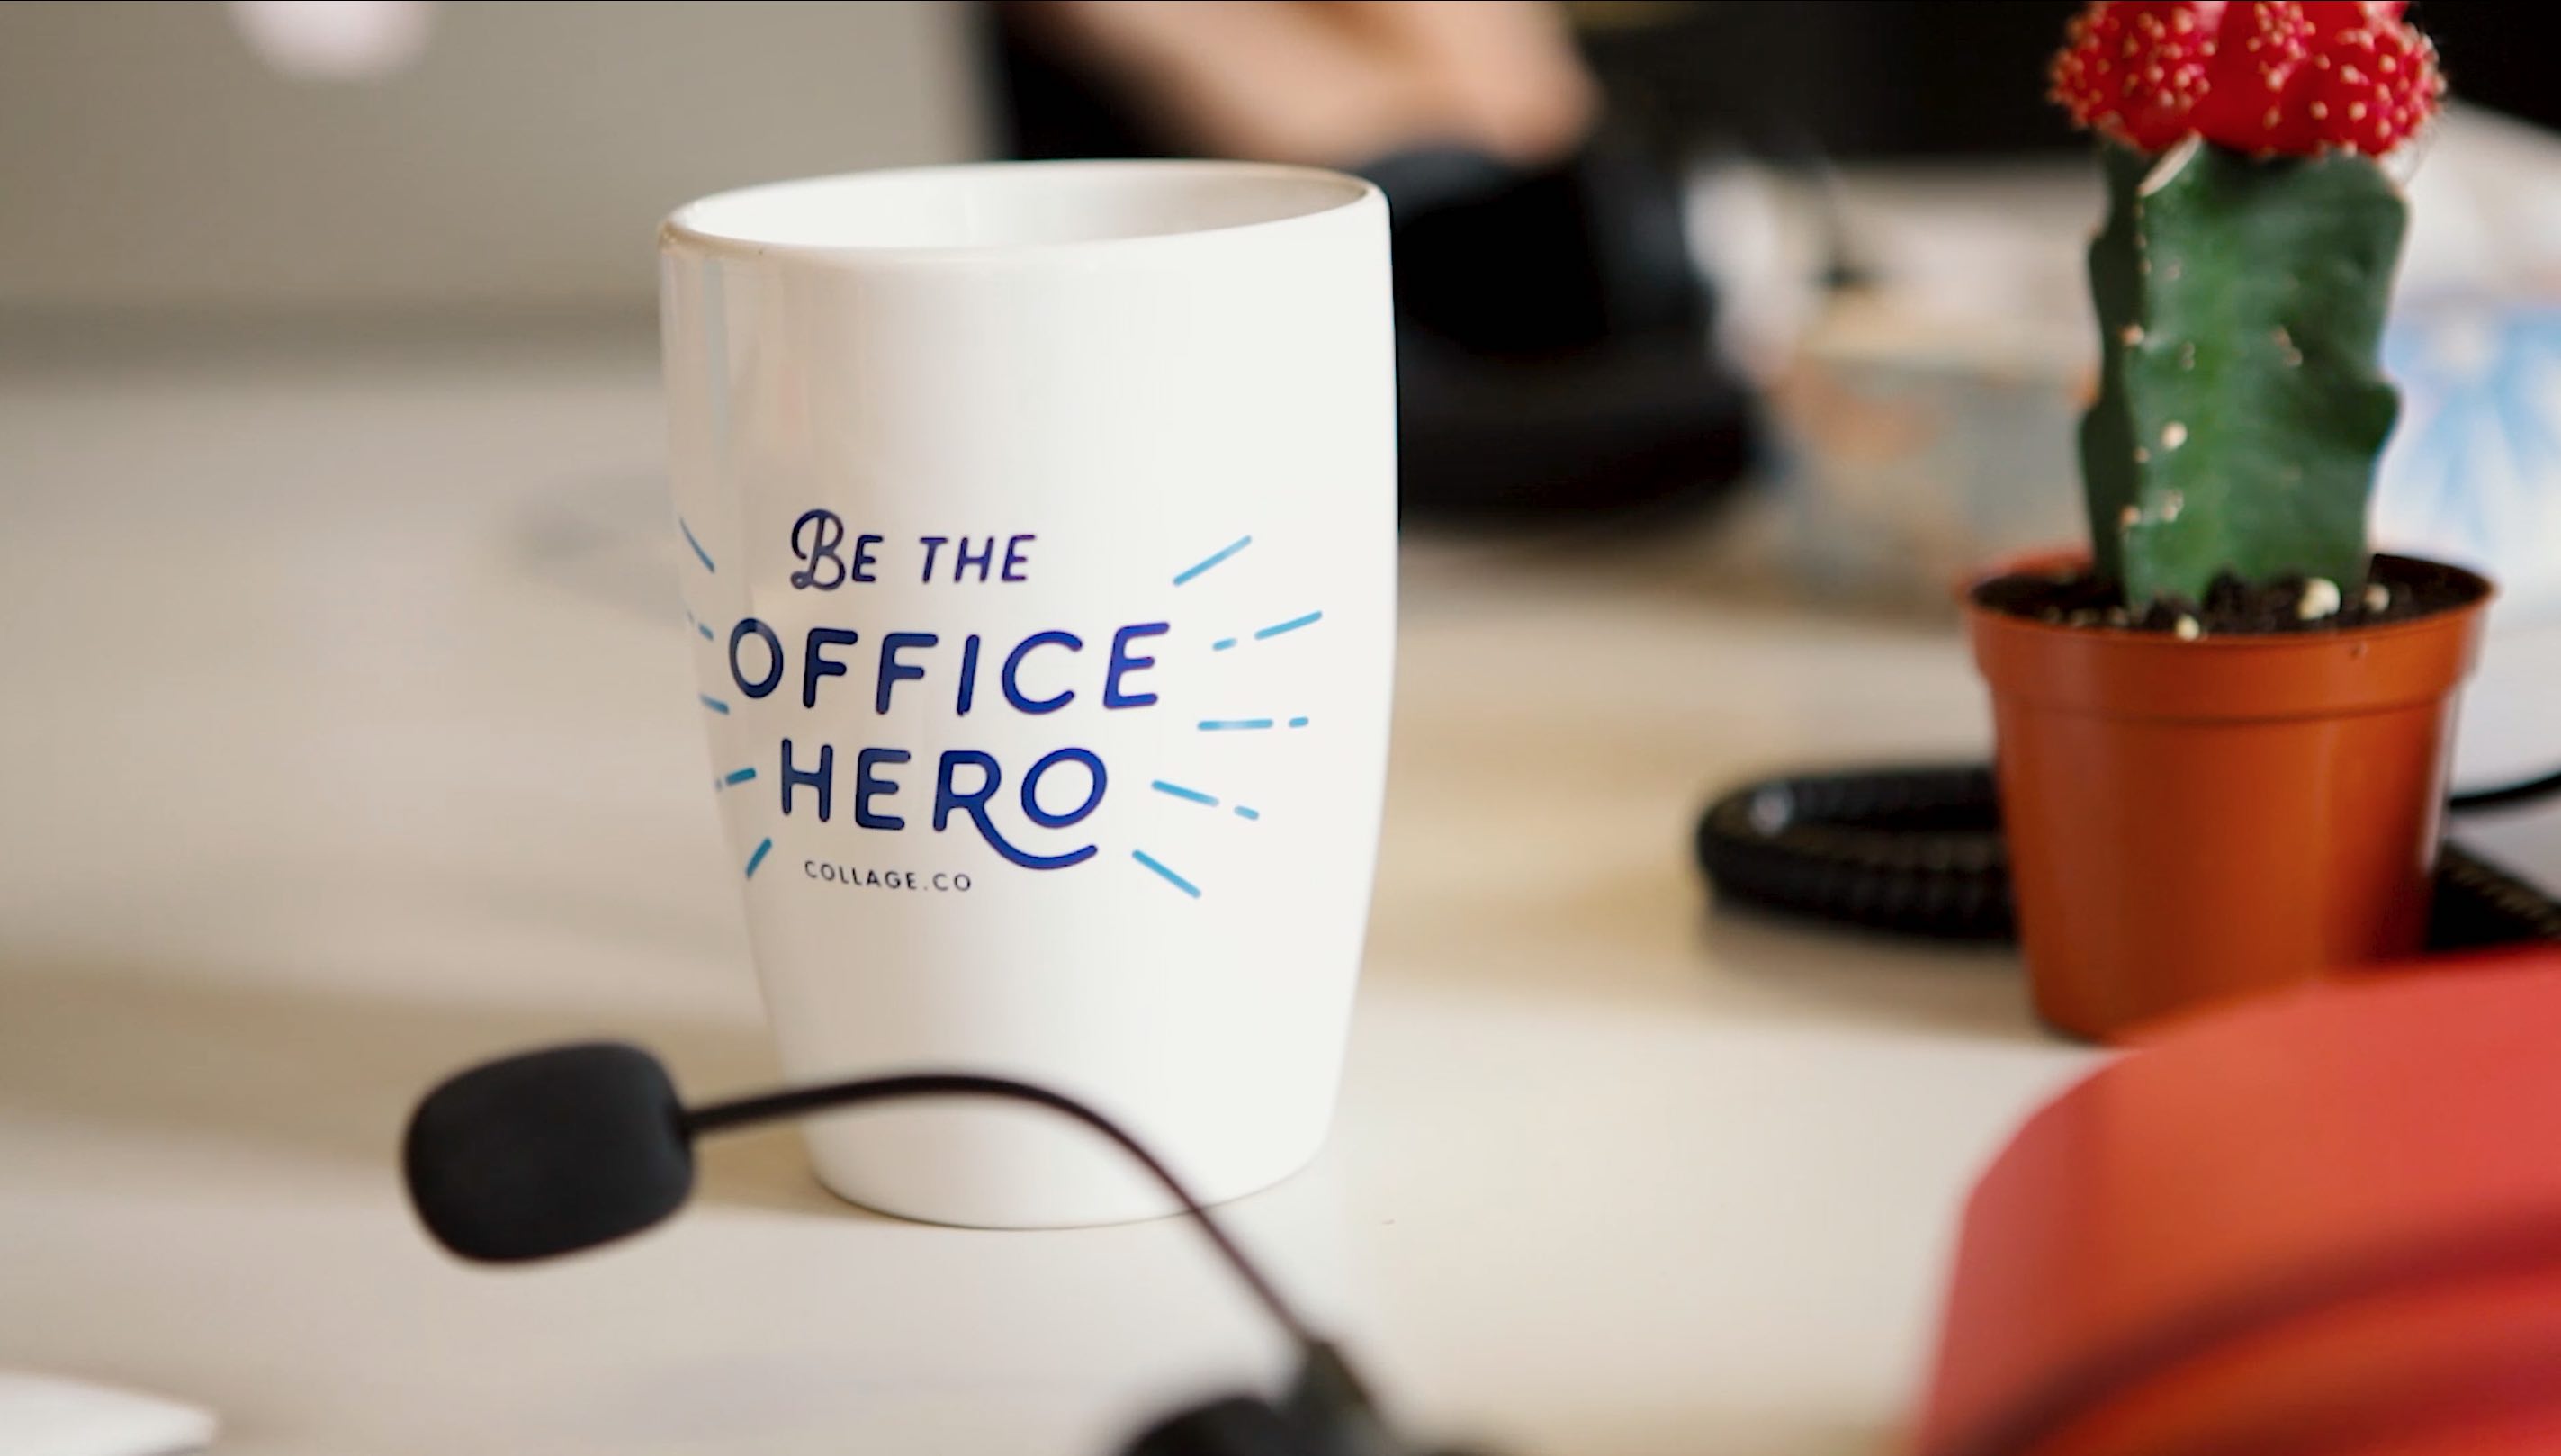 How a HR Software Small Business Shares Their Office Hero Stories with  Cinemagraphs | Flixel Photos